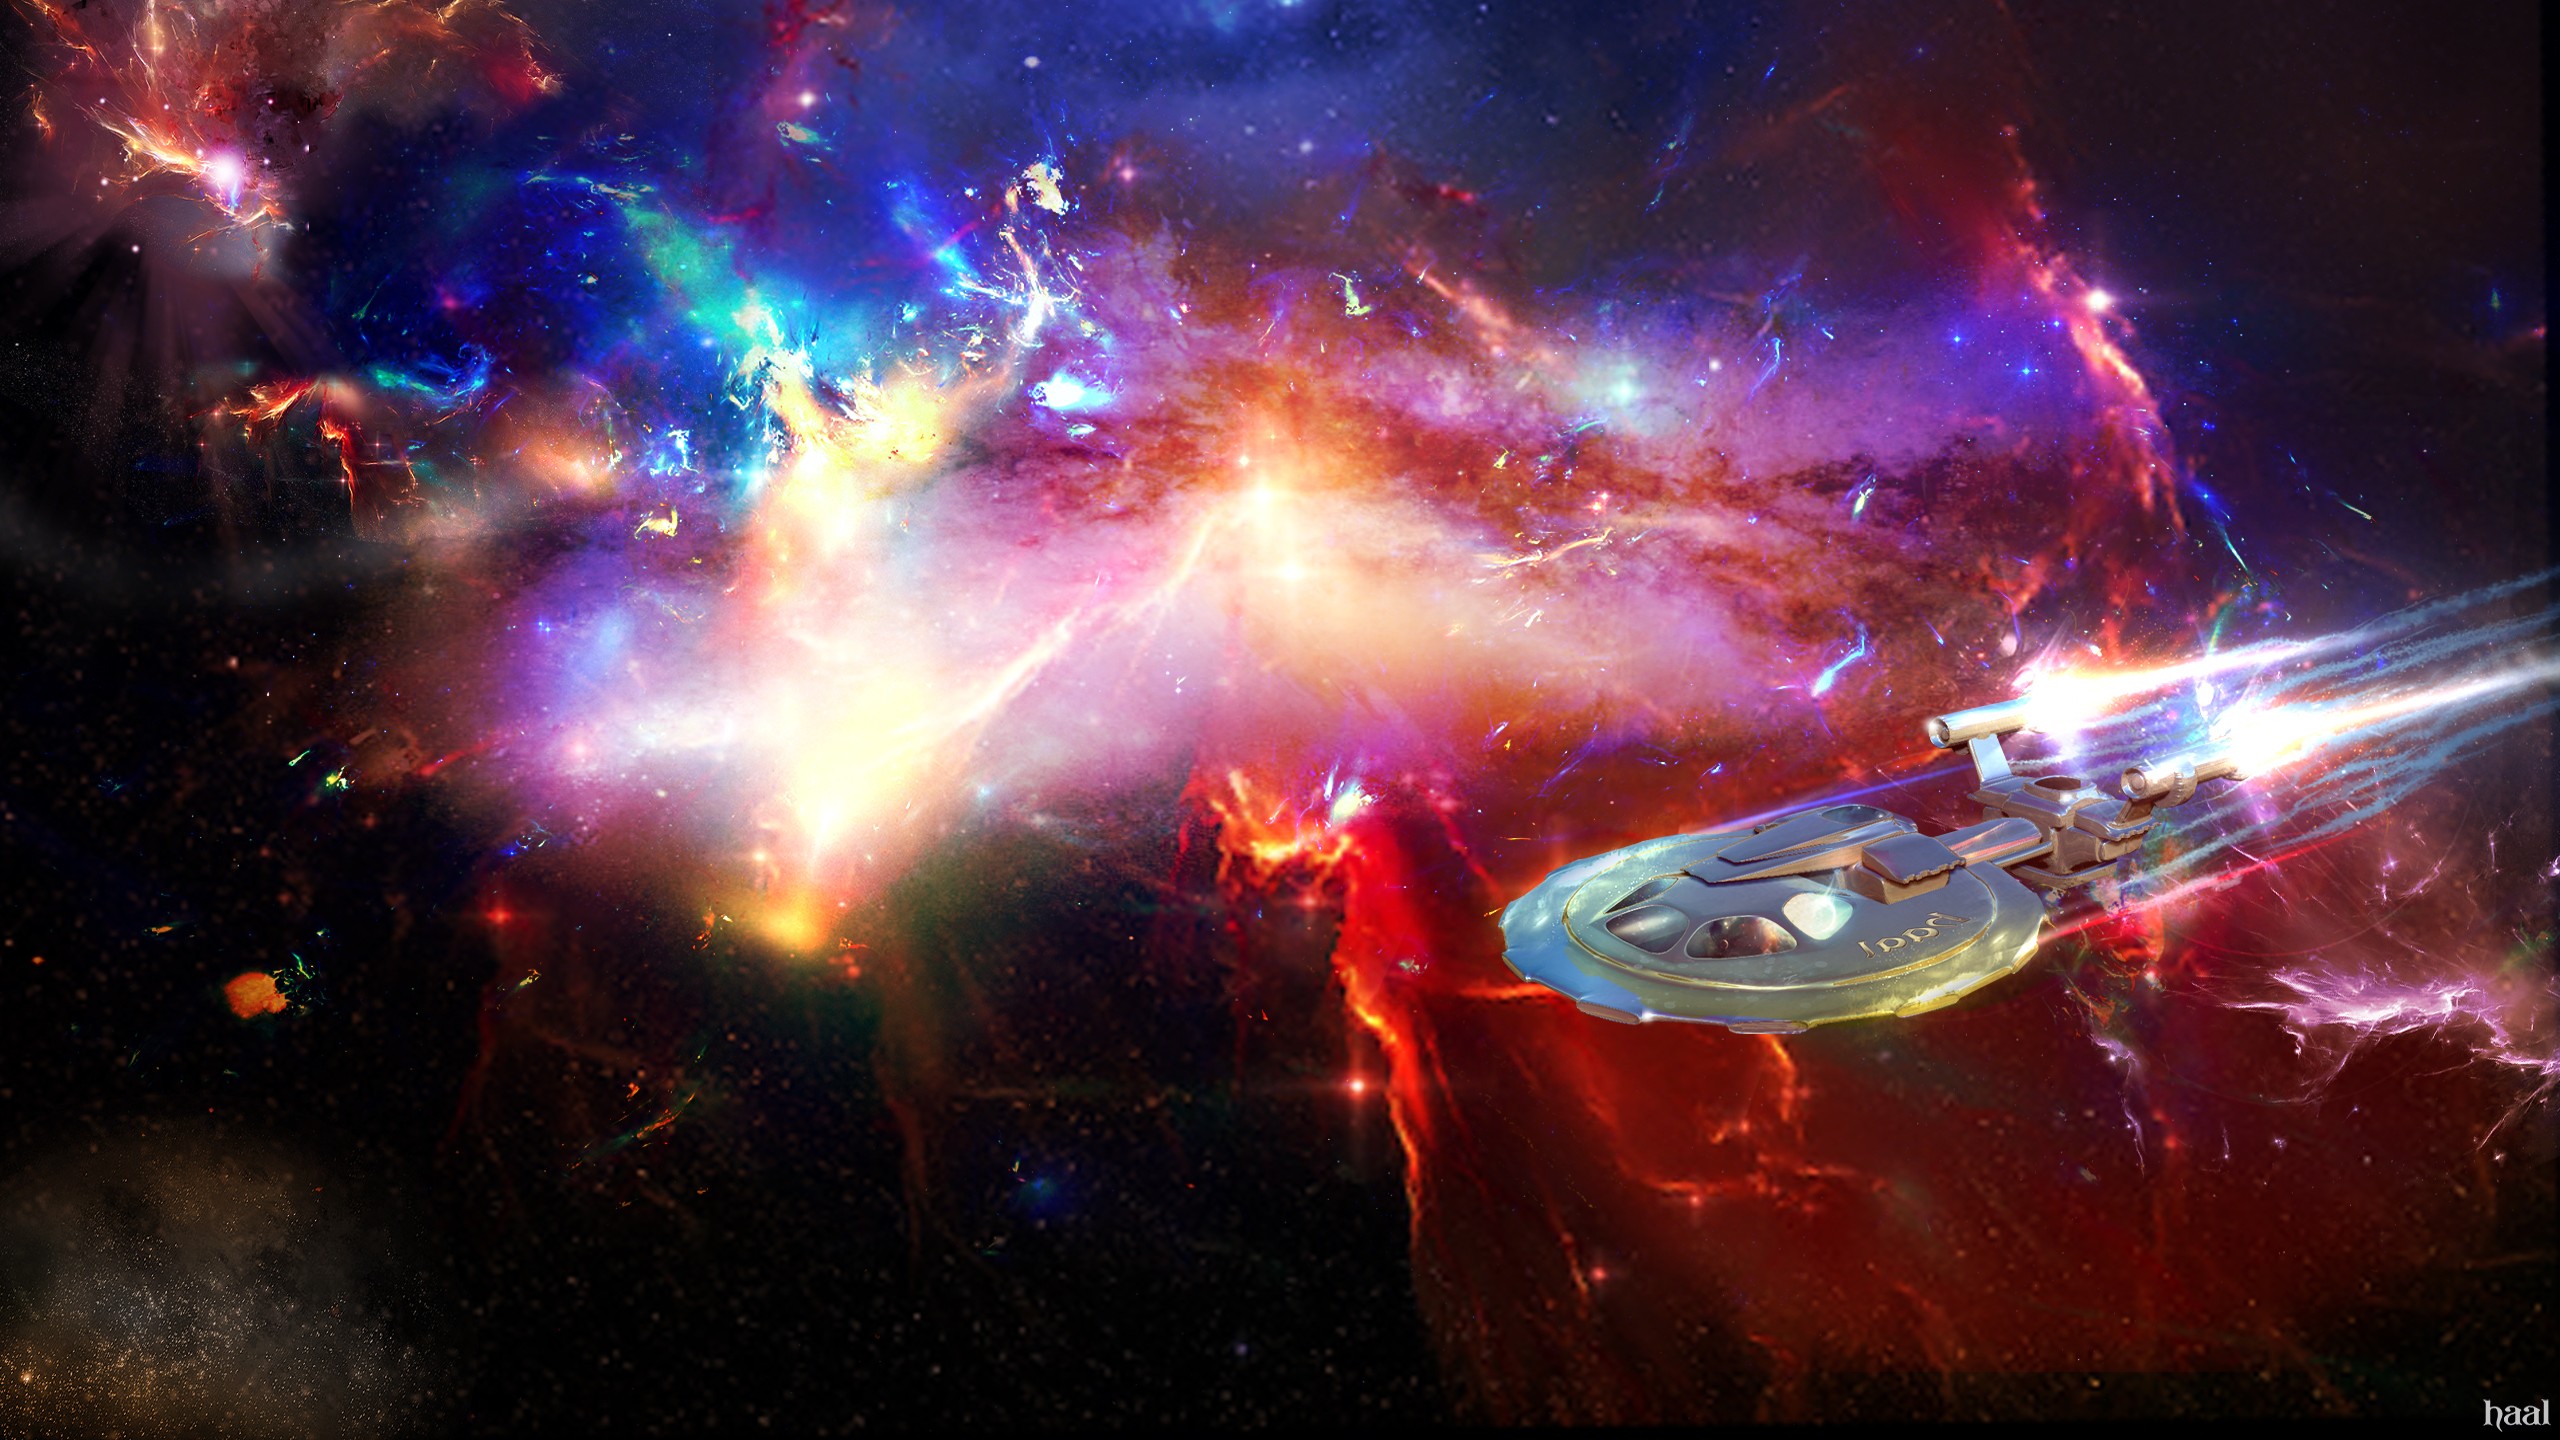 outer space, Space Shuttle, nebulae, spaceships, vehicles - desktop wallpaper